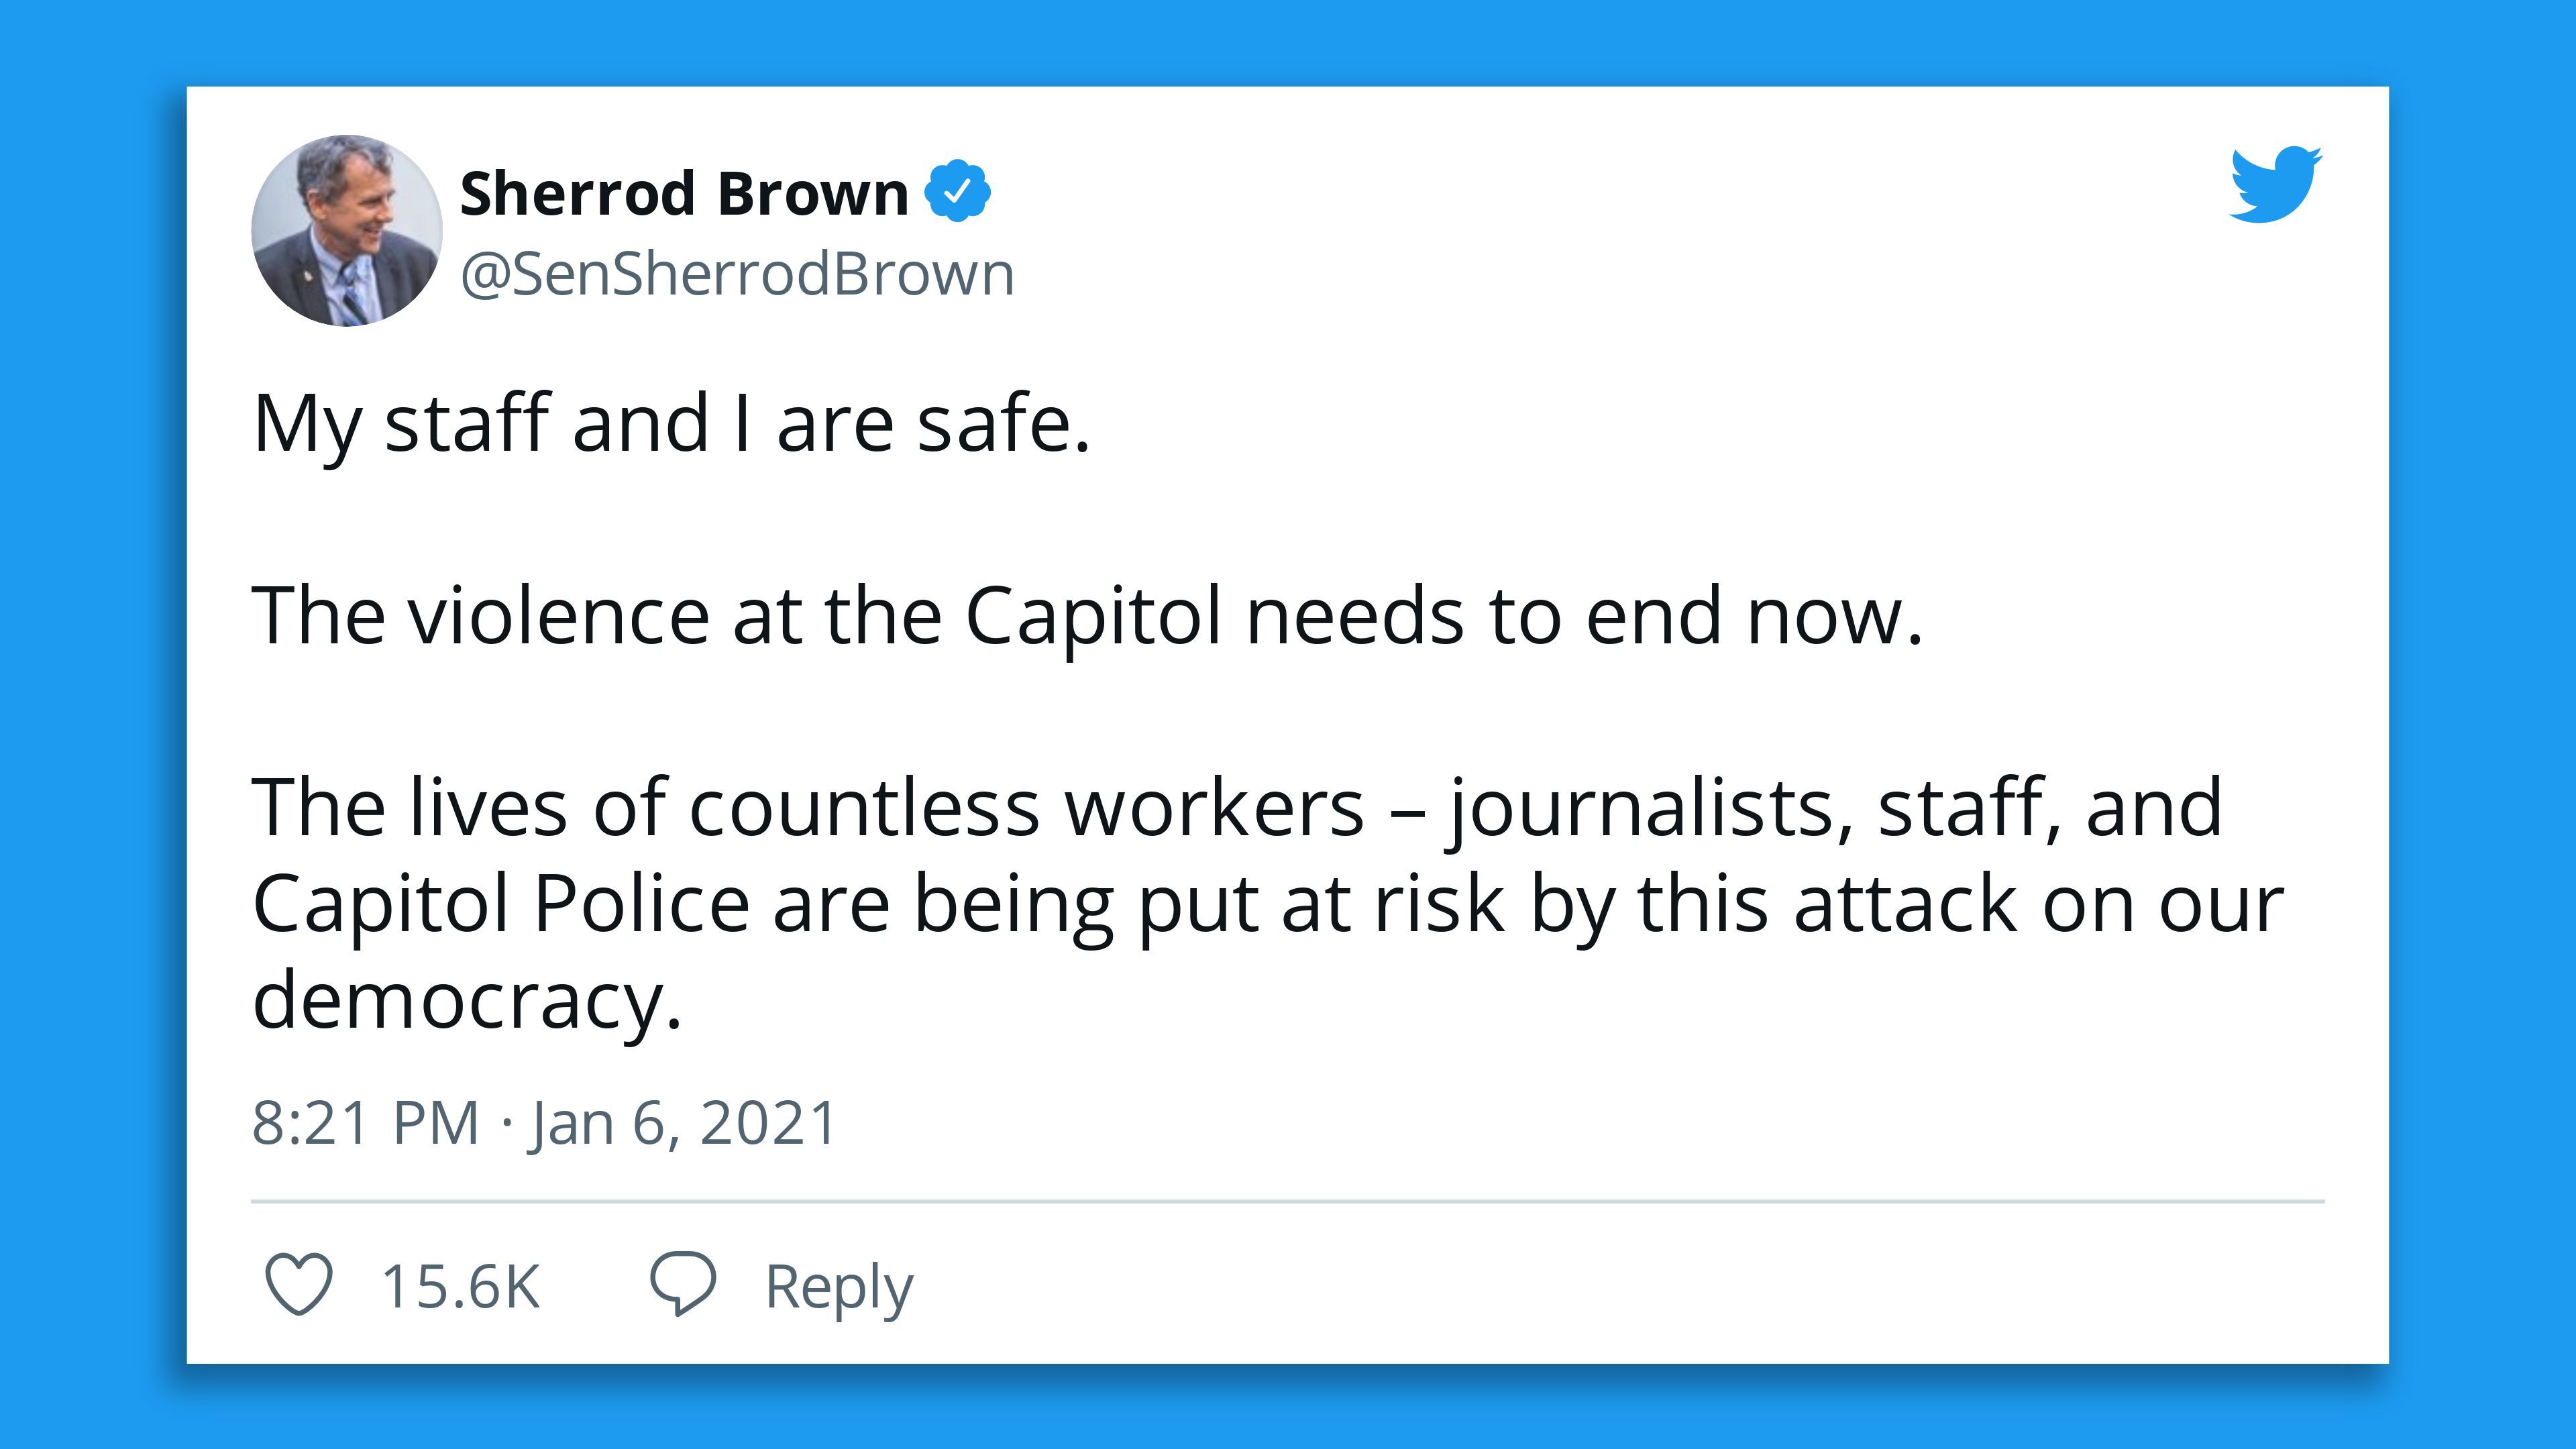 Tweet reading, "My staff and I are safe.  The violence at the Capitol needs to end now.  The lives of countless workers – journalists, staff, and Capitol Police are being put at risk..."